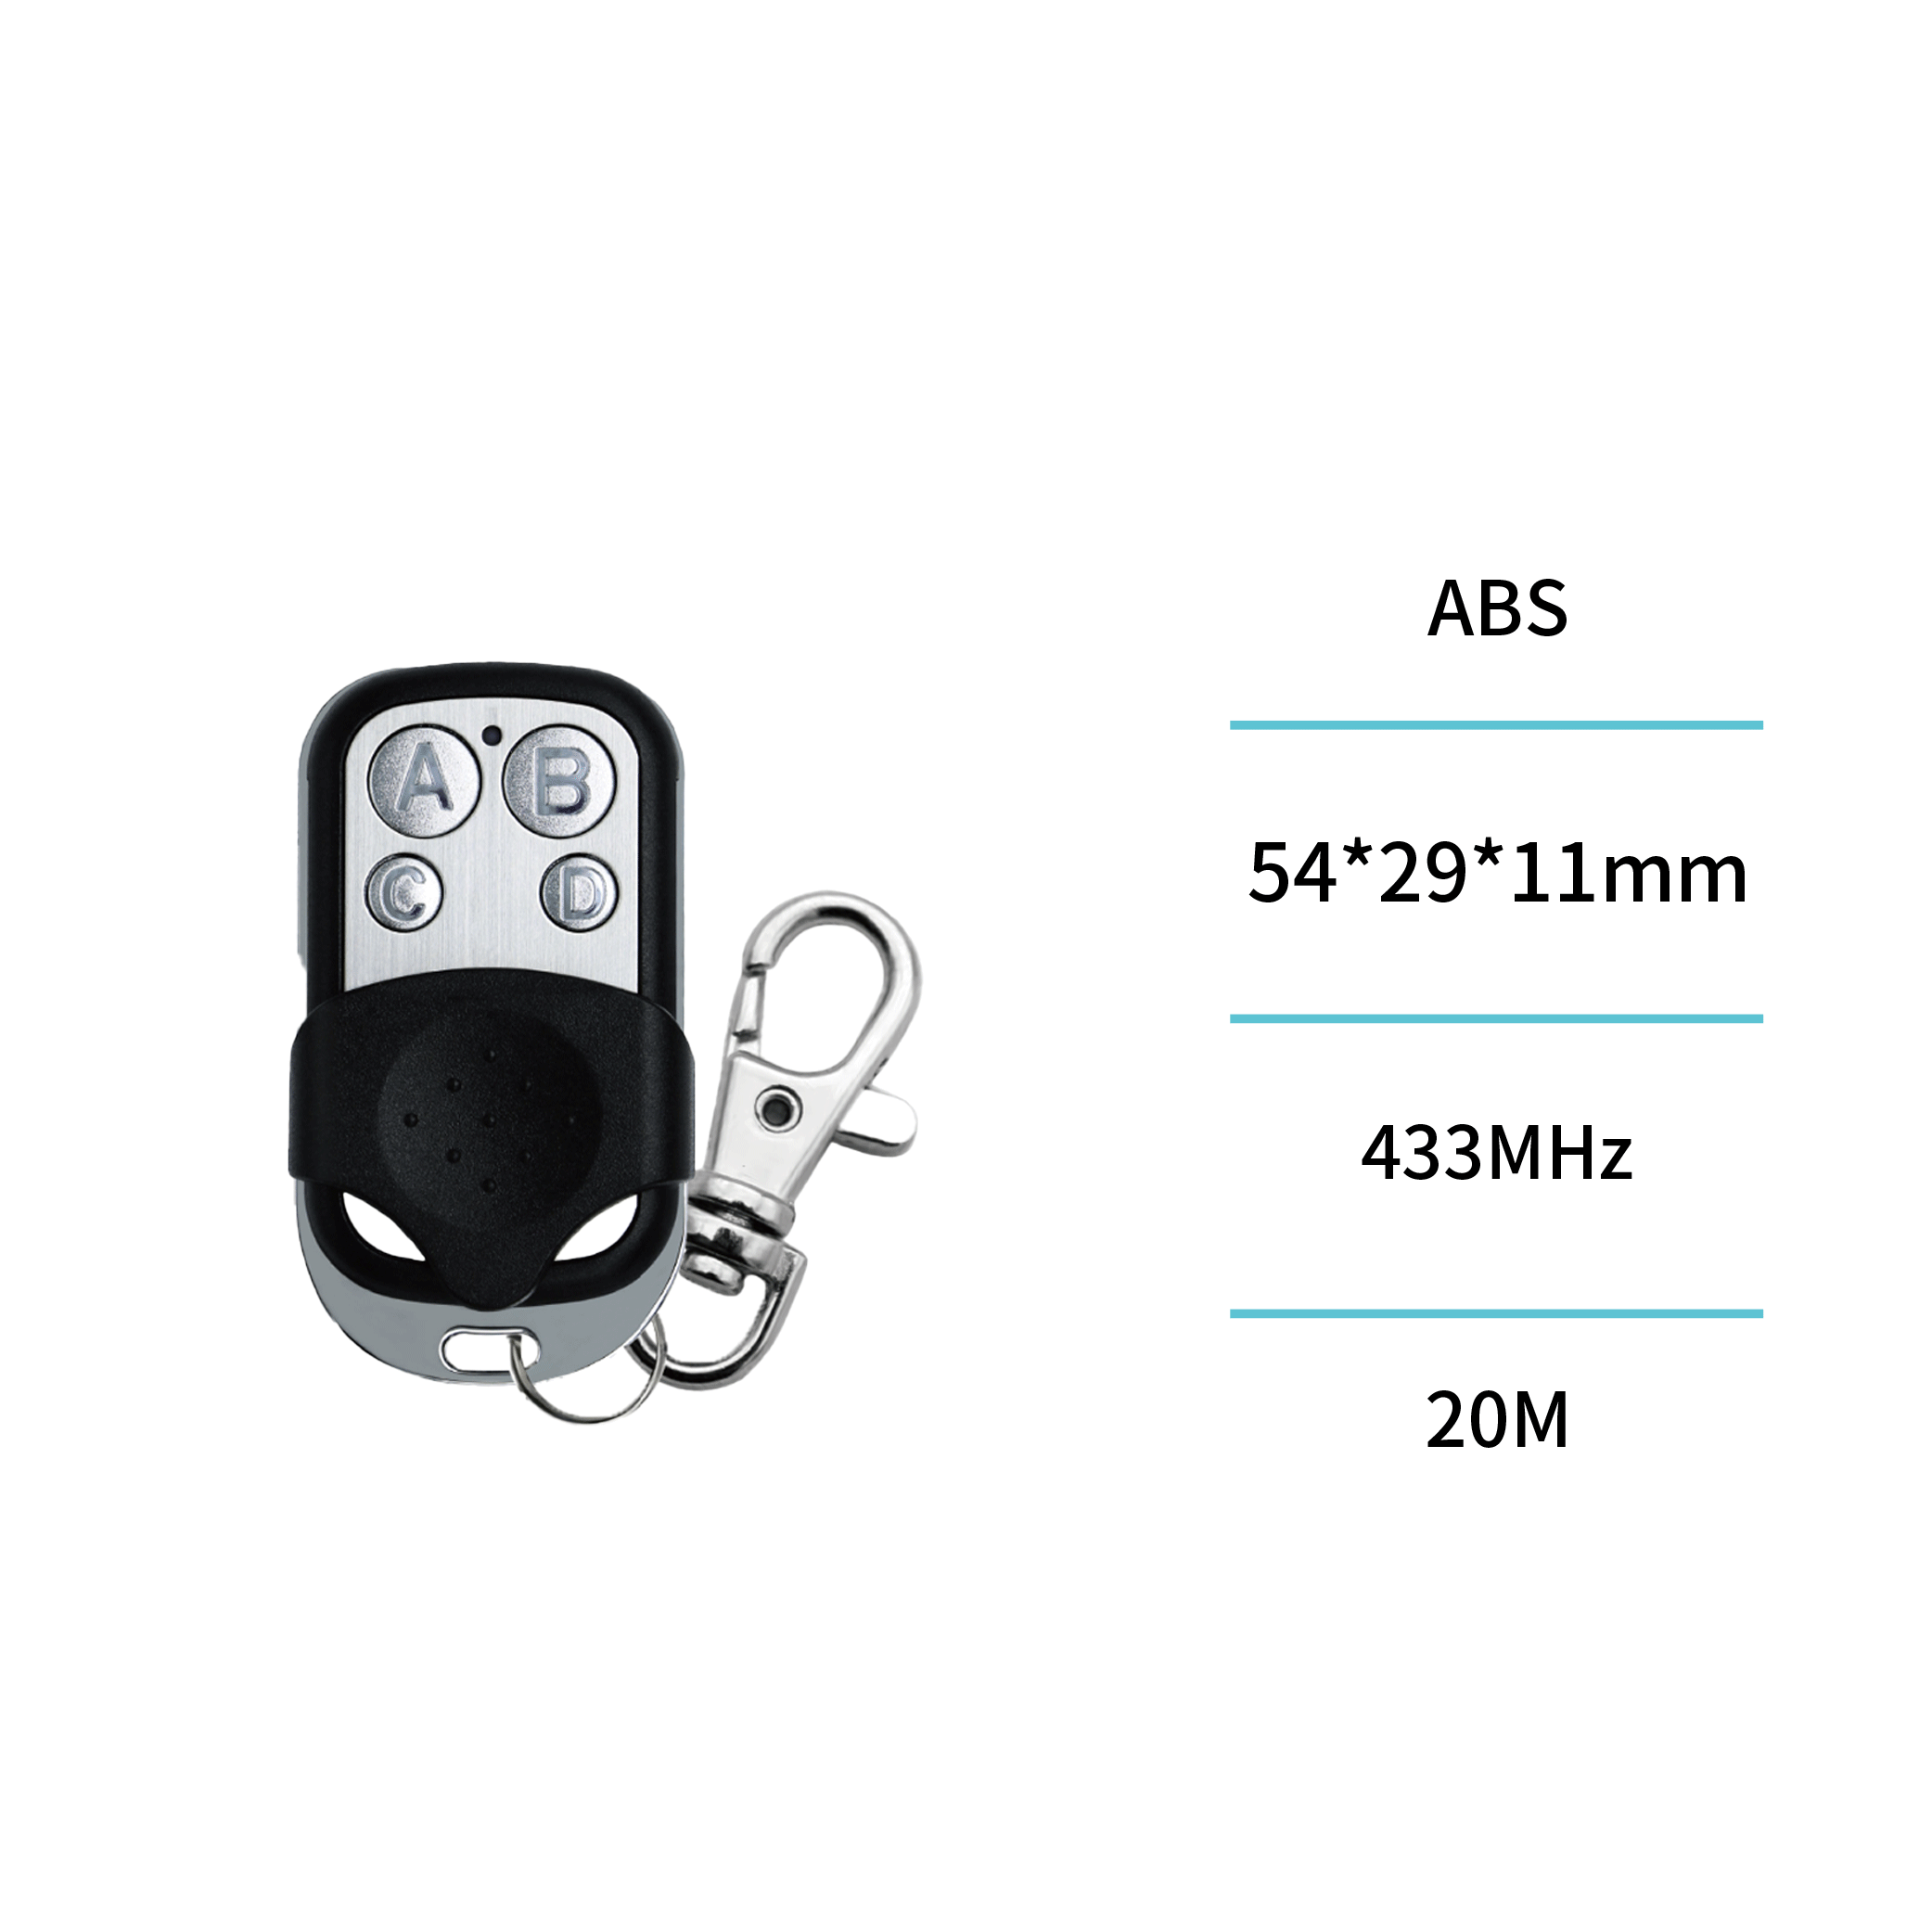 Unico RT0375 433 Frequency Universal Garage Remote Control Black+Silver